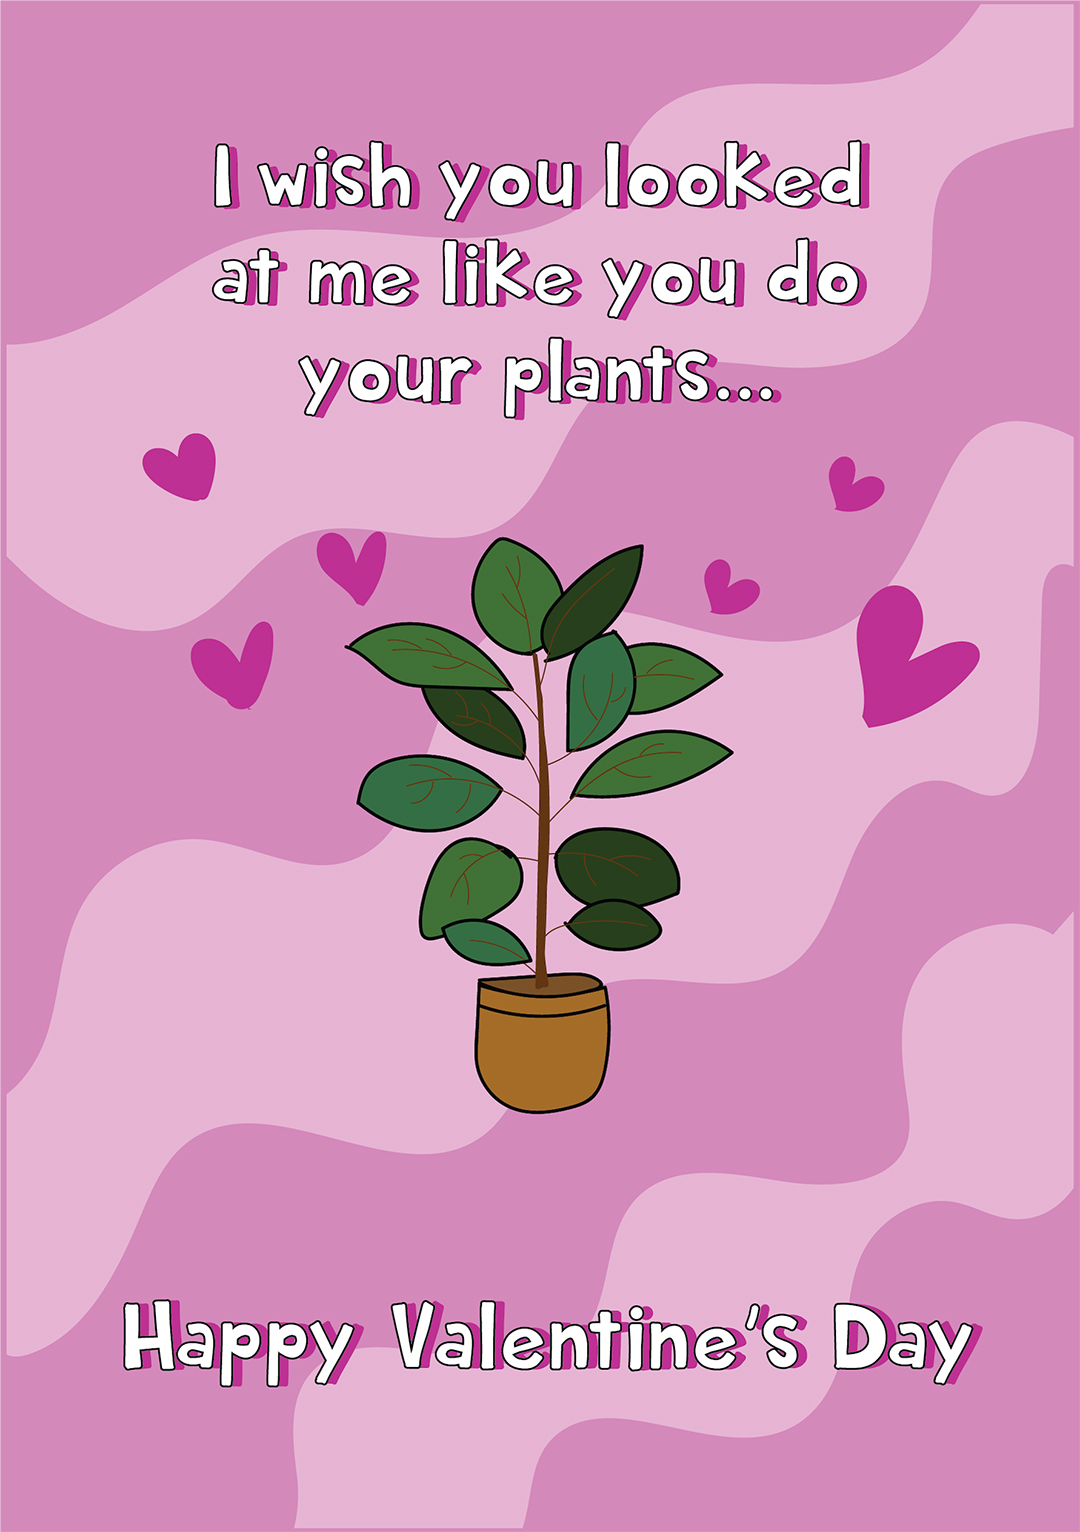 I Wish You Looked At Me The Way You Do Your Plants - Valentine's Day Card